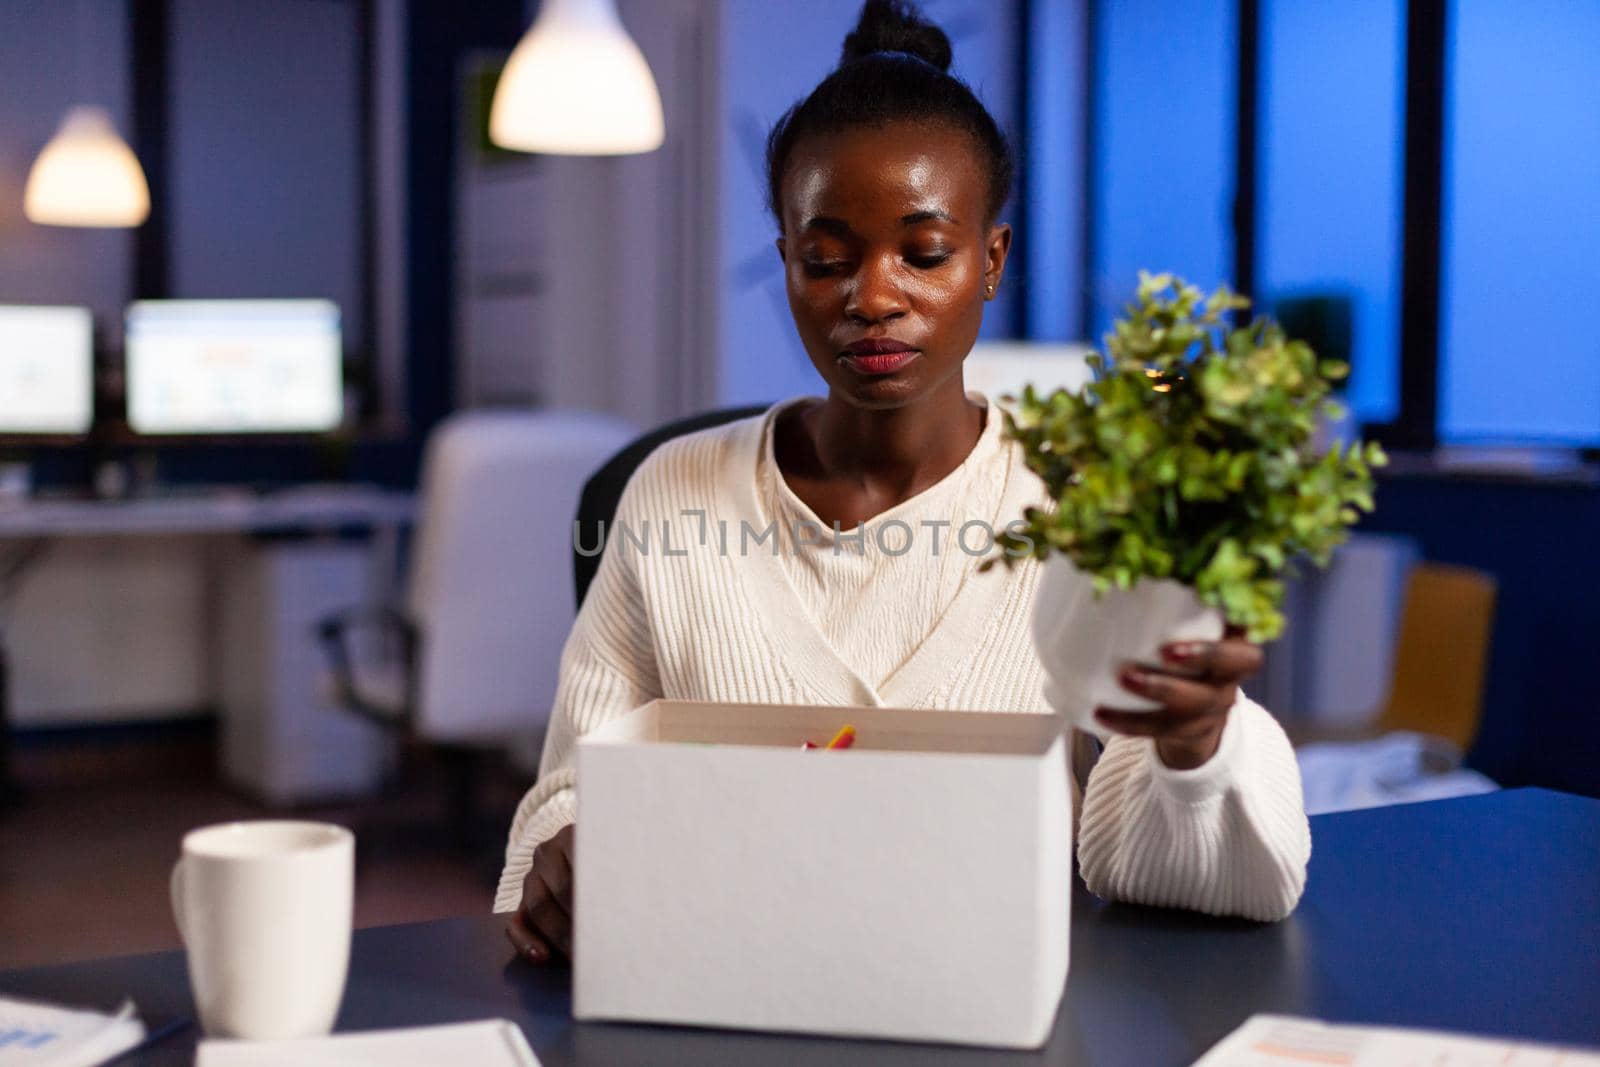 Depressed african woman after being dismissed from work late at night. Unemployed packing things late at night. woman leaving workplace office in midnight.